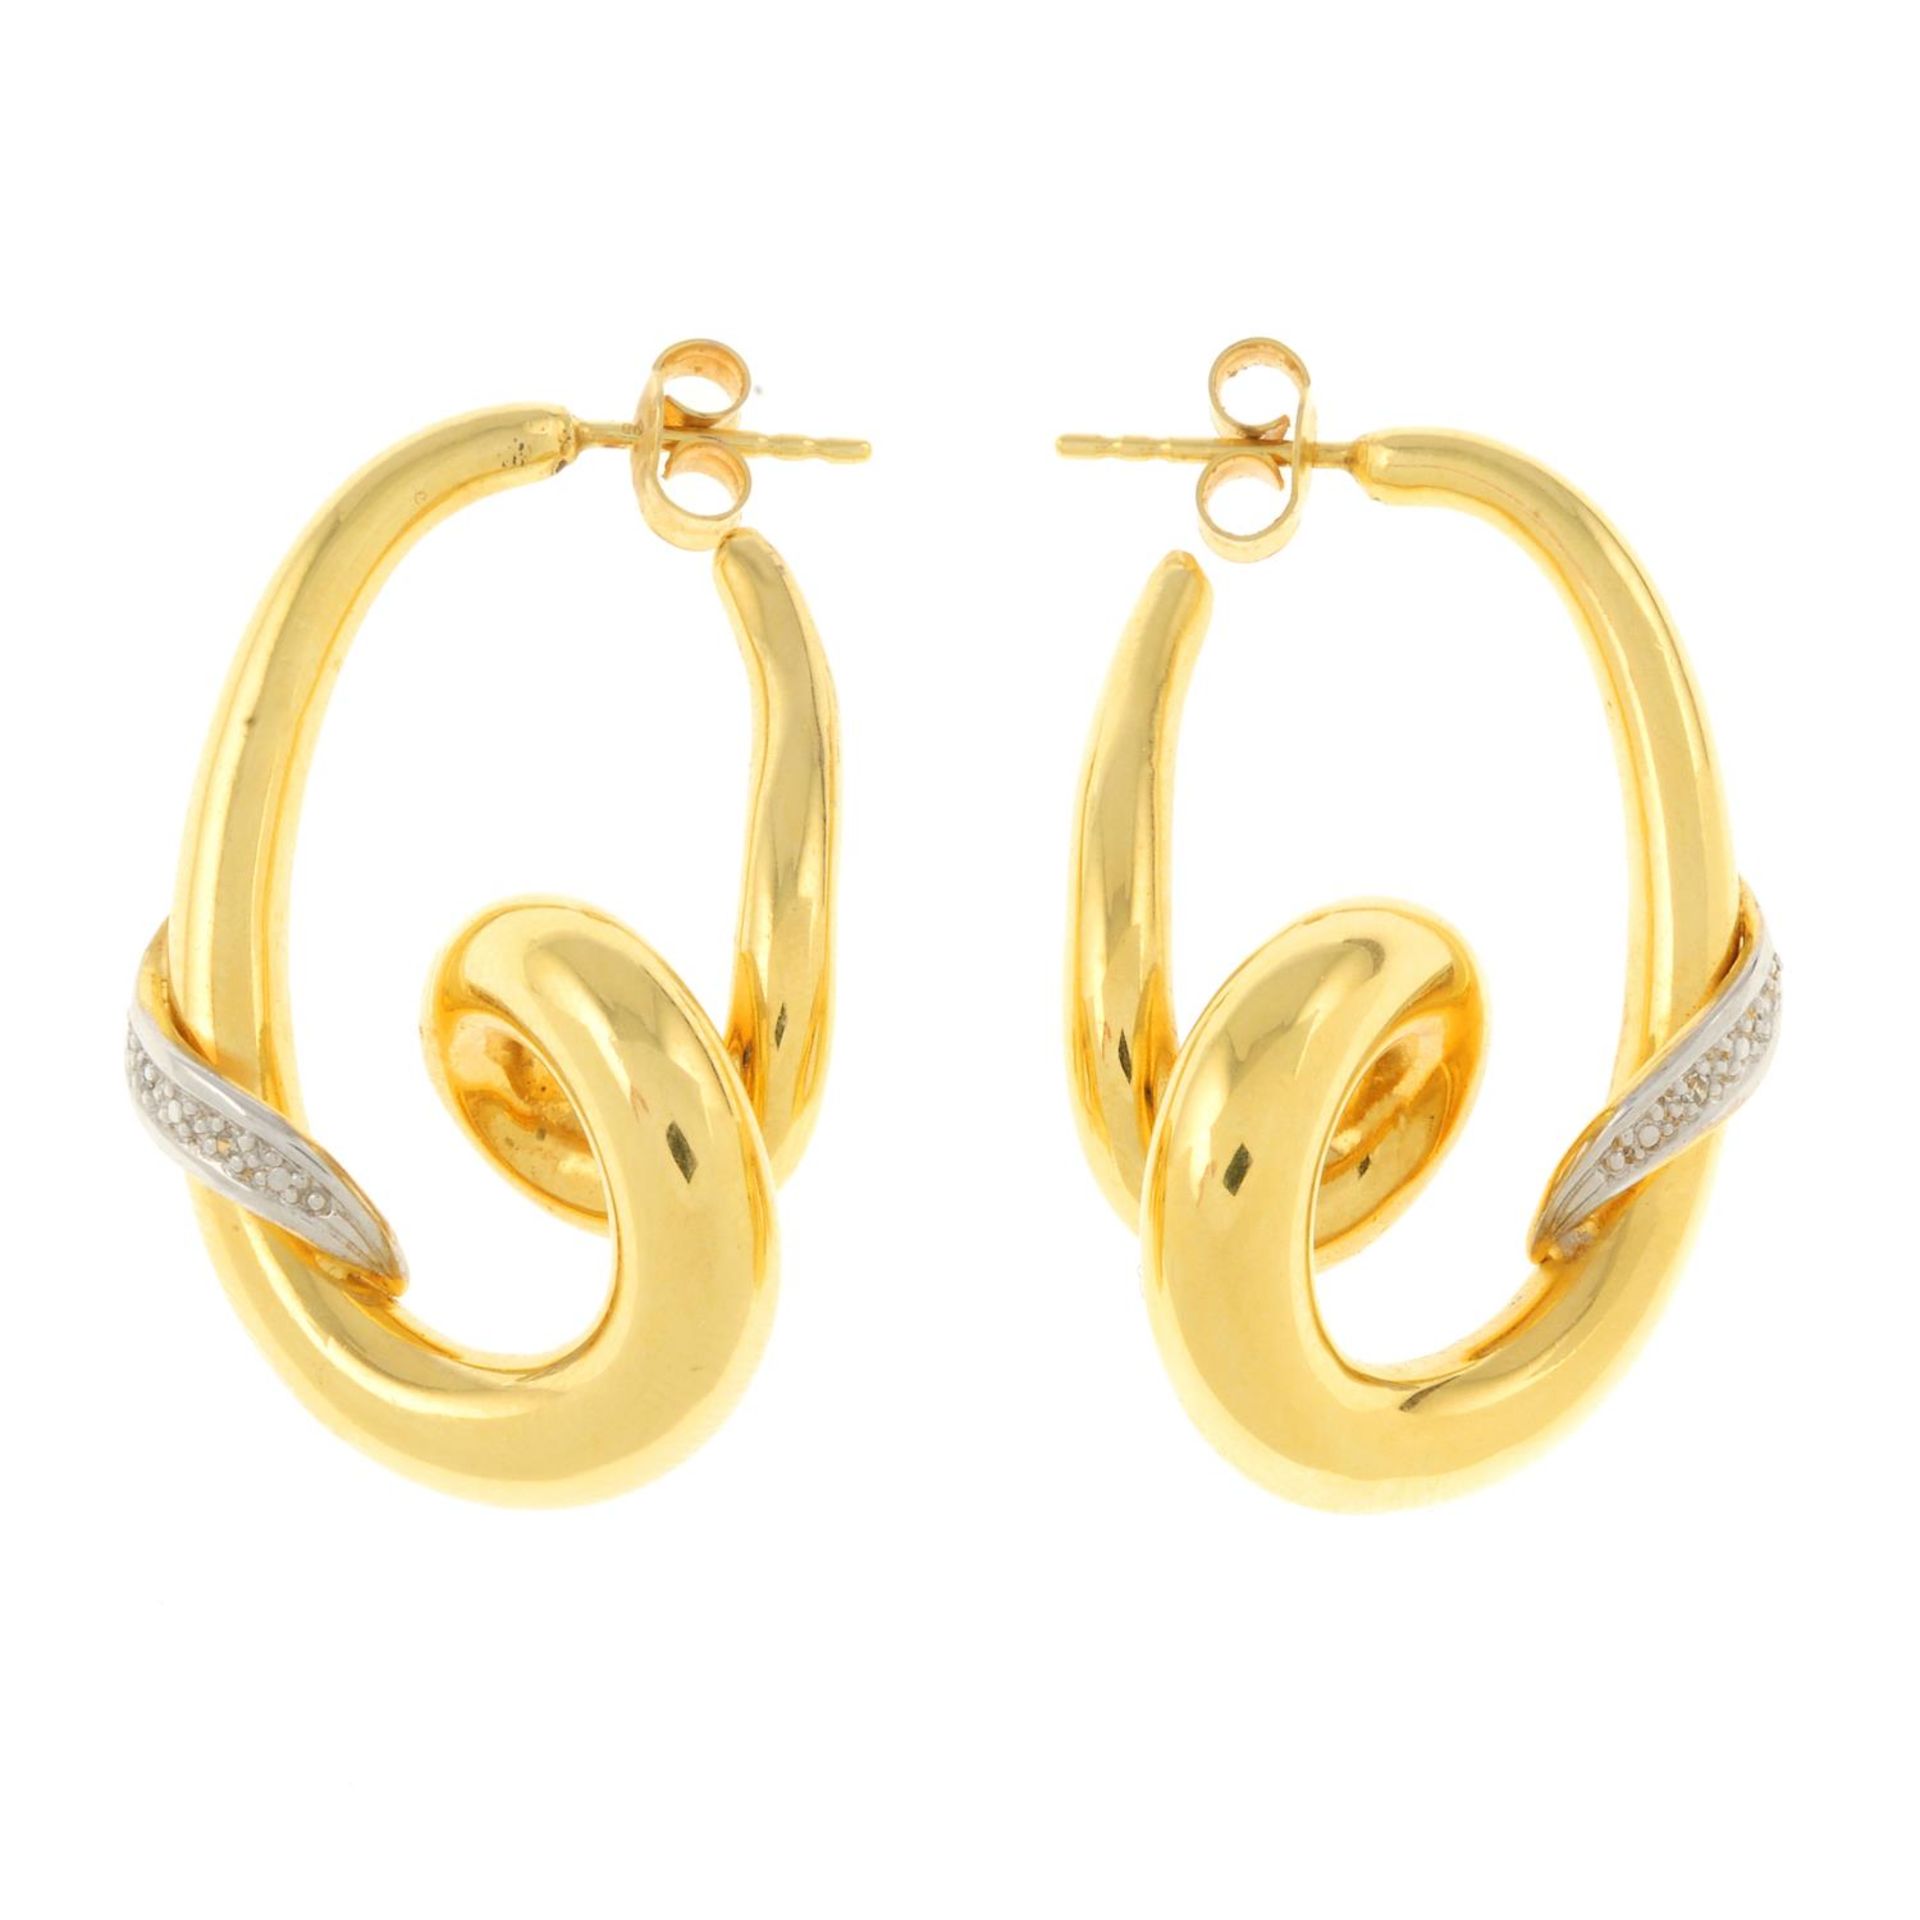 A pair of spiral earrings, with diamond accents.